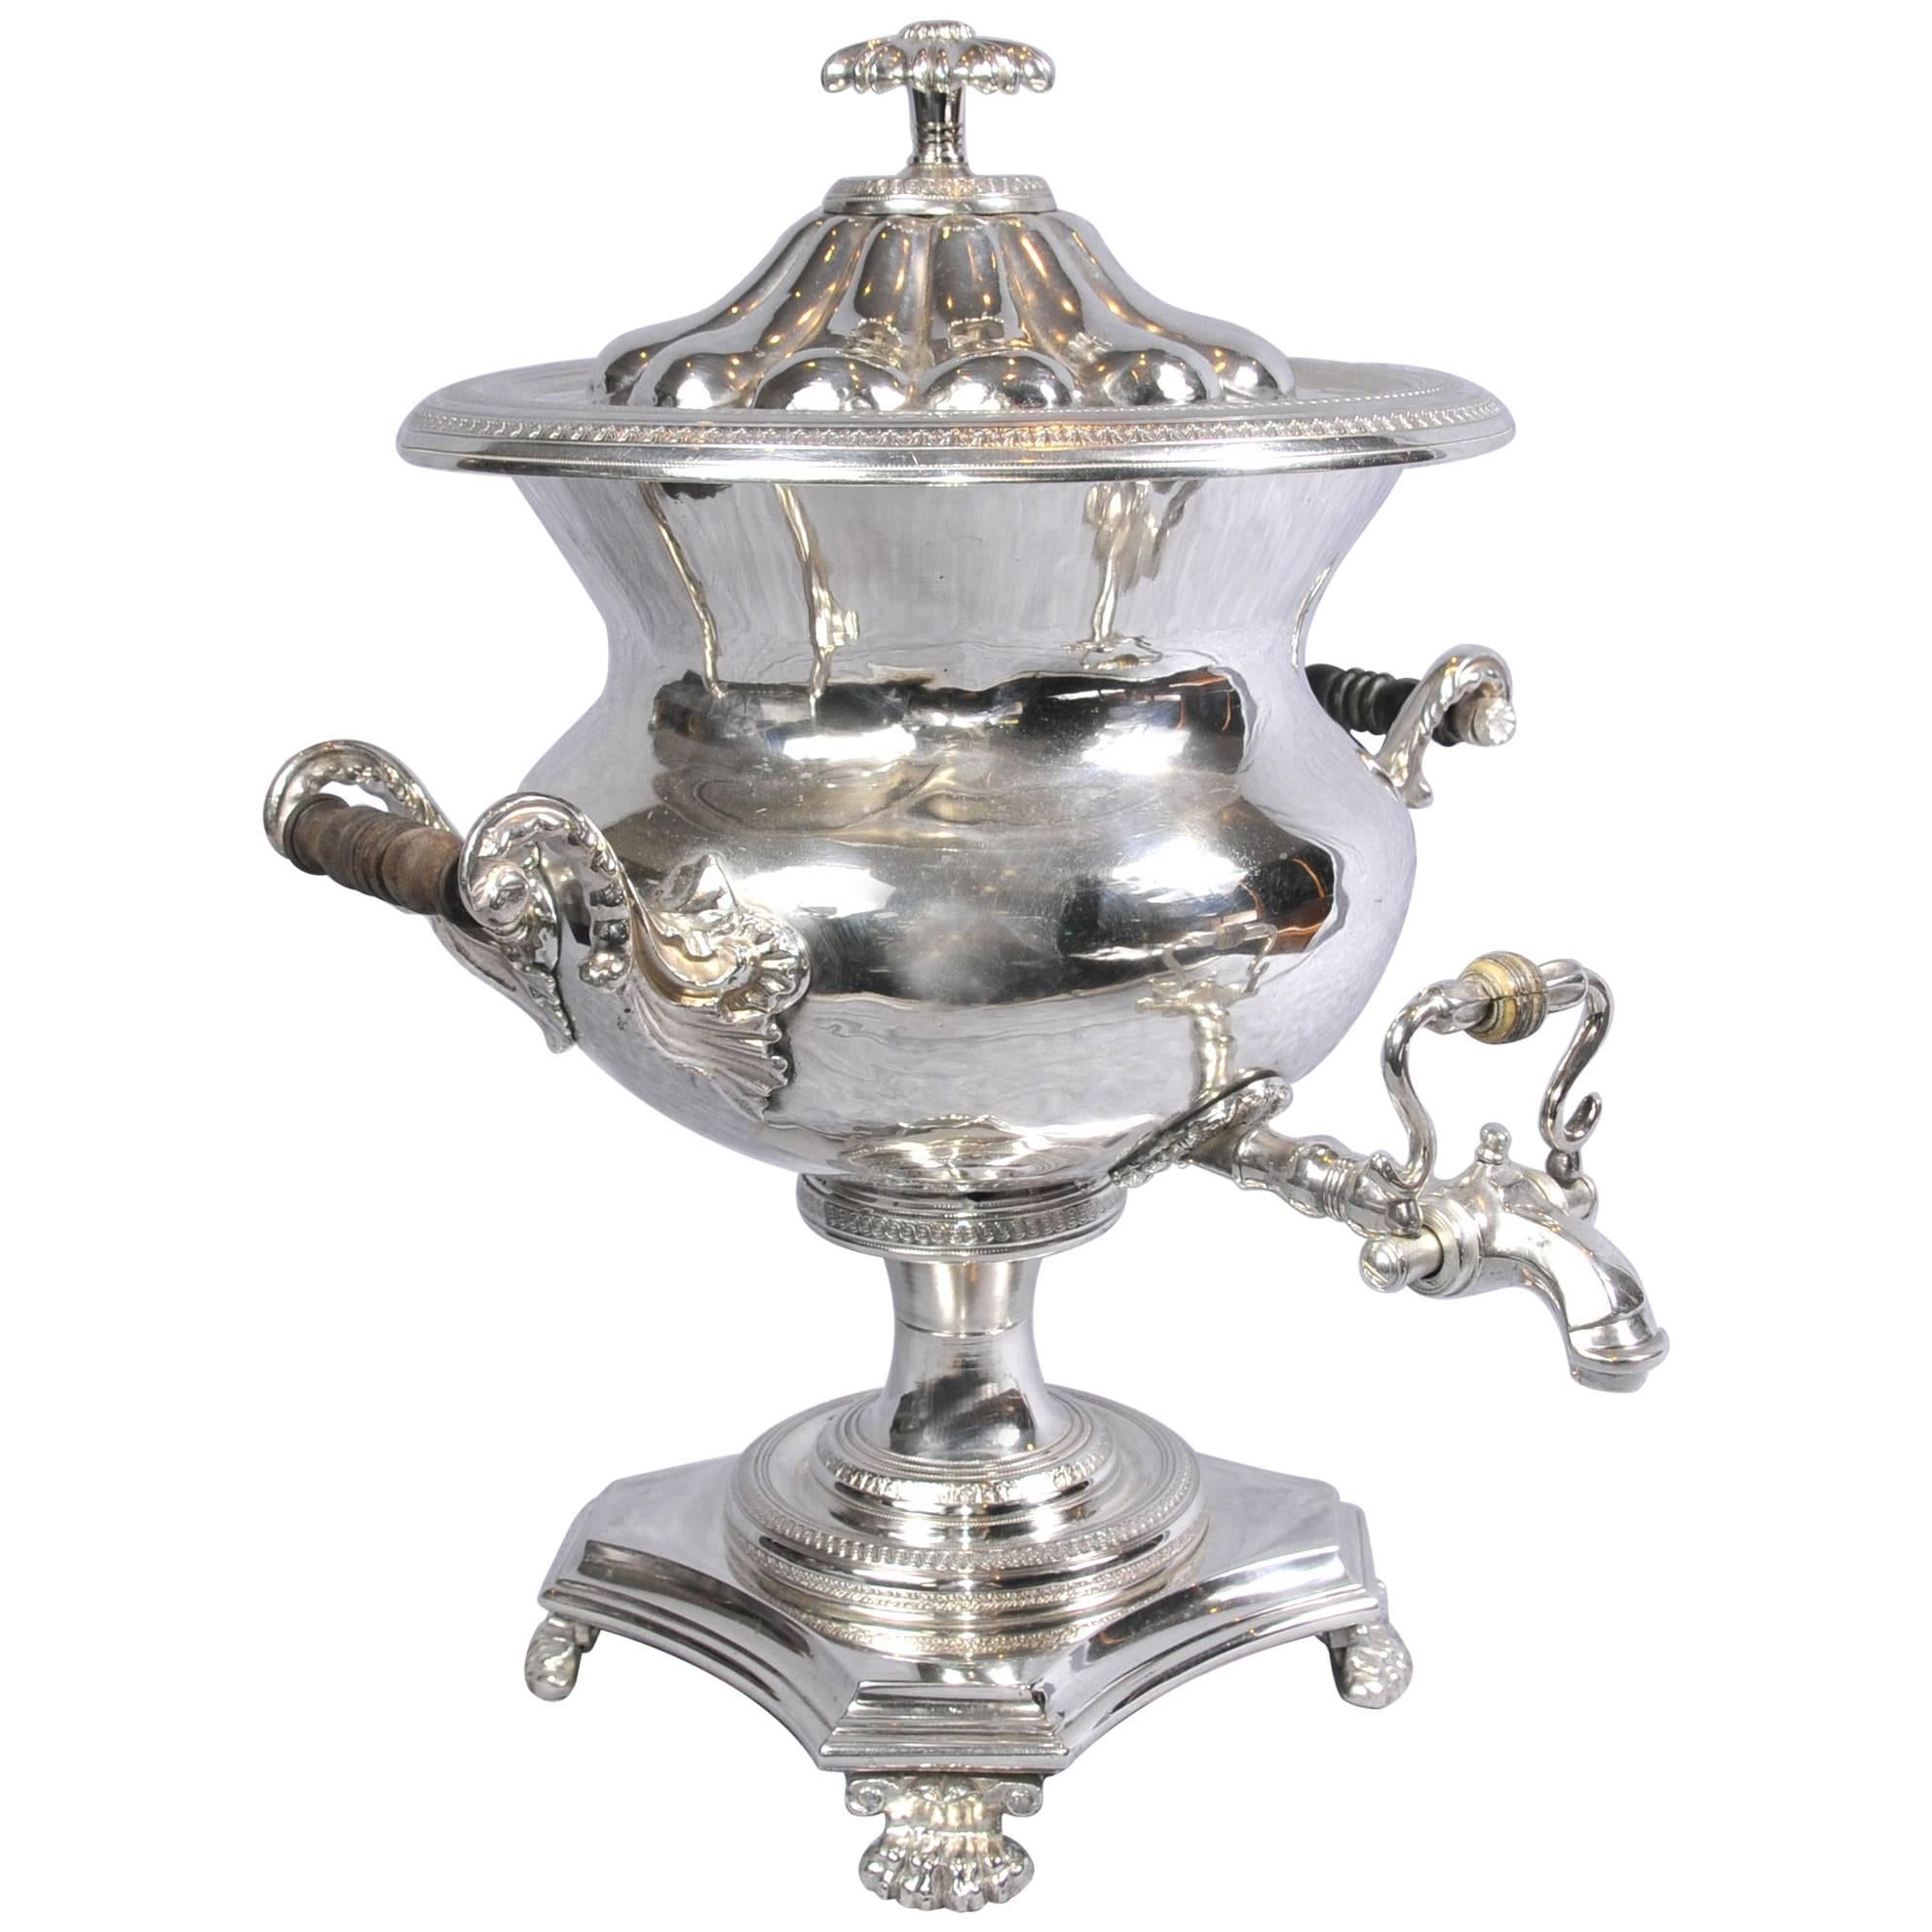 Antique English Silver Plate Samovar Tea Coffee Urn Sheffield Silver Plate For Sale